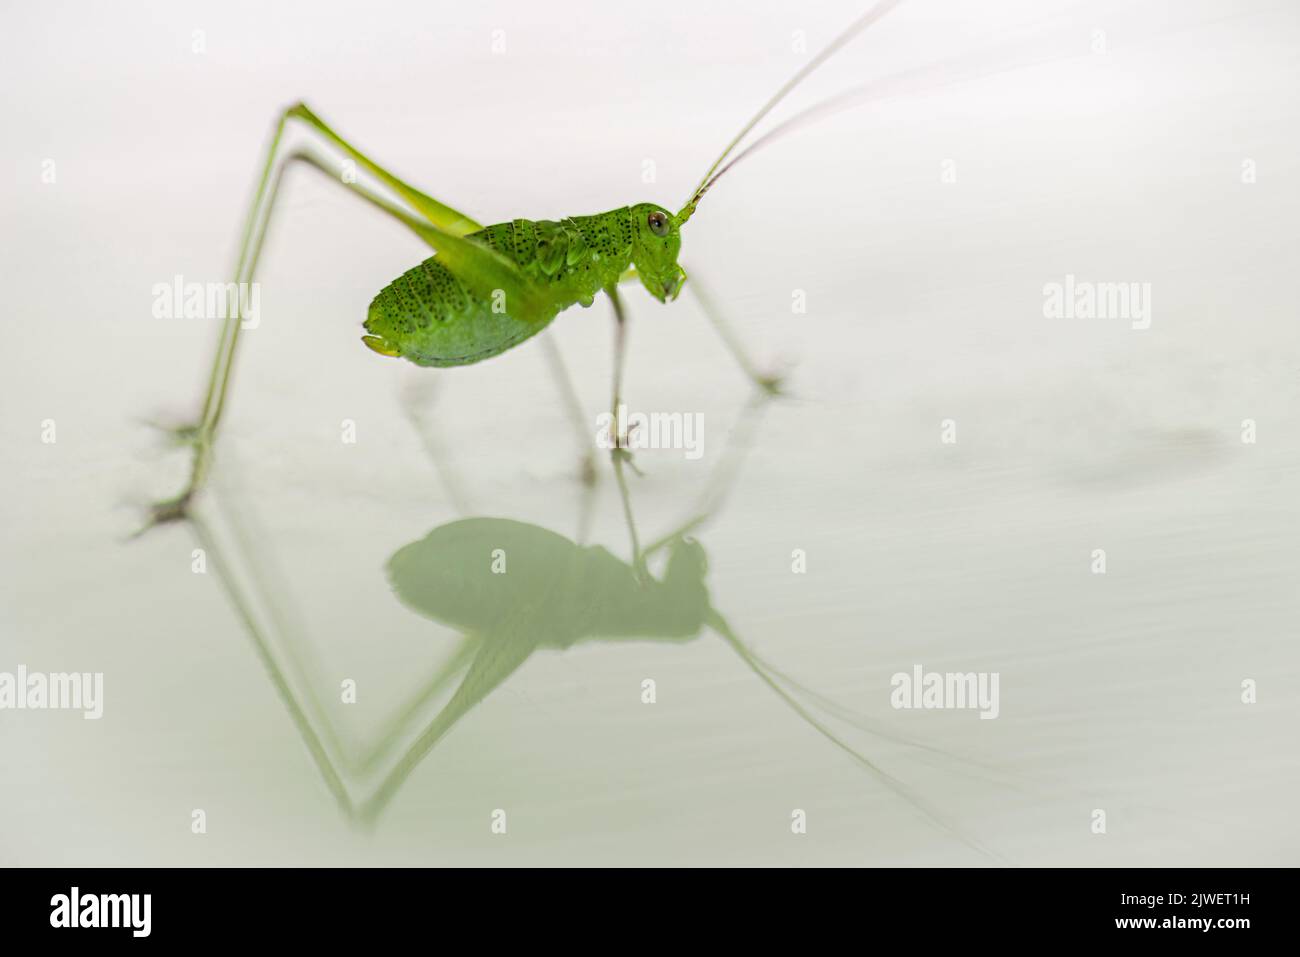 A locust at the flat reflecting surface Stock Photo